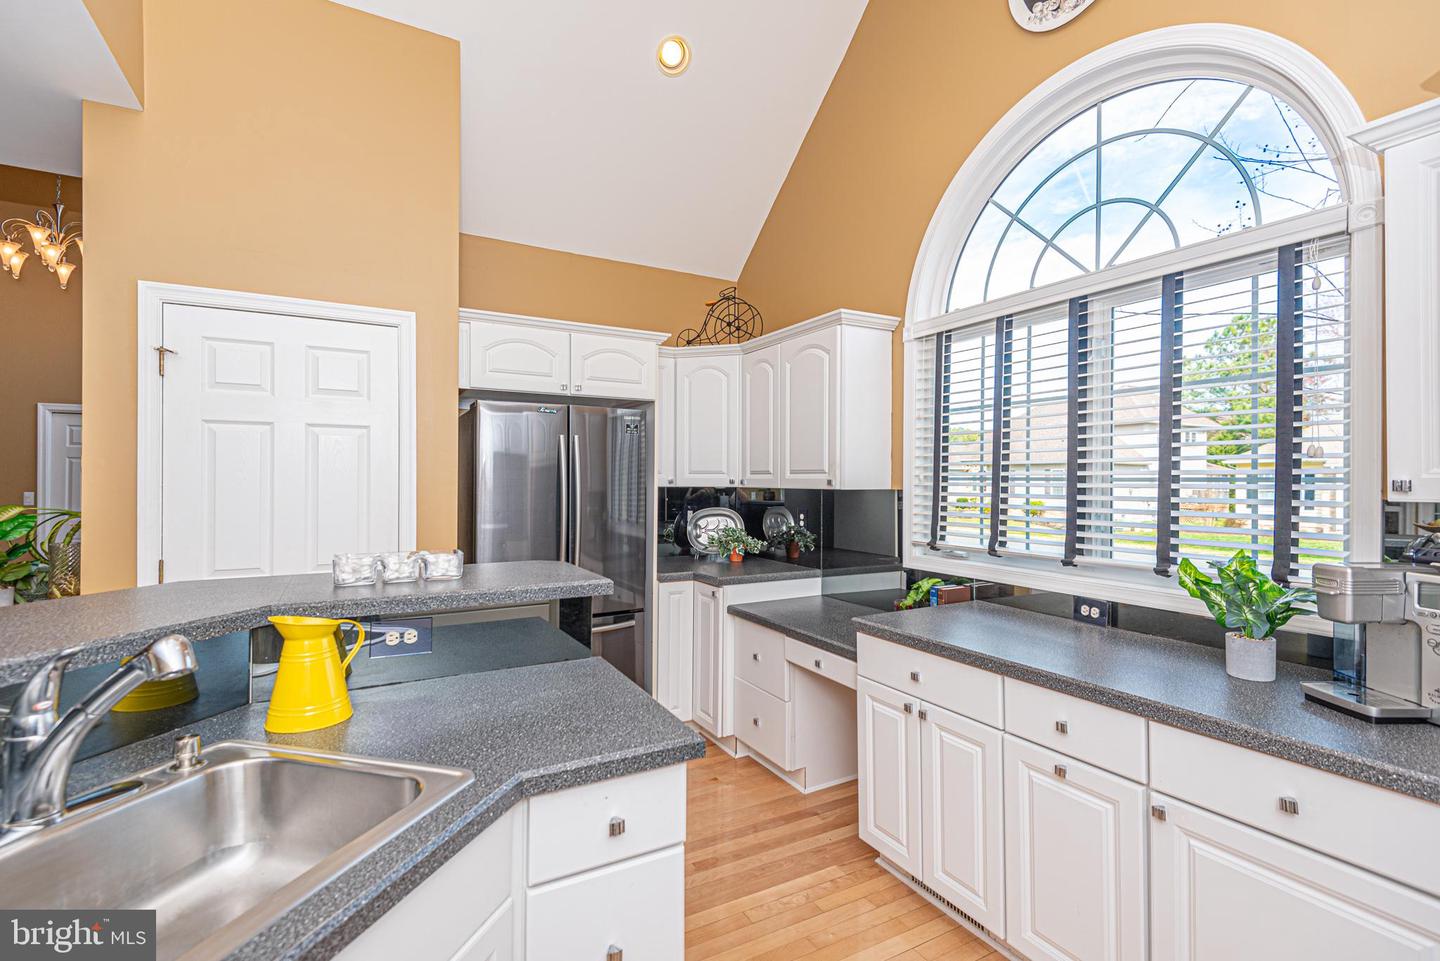 MDWO2019426-802903995156-2024-03-08-00-14-50 106 Pine Forest Dr | Berlin, MD Real Estate For Sale | MLS# Mdwo2019426  - 1st Choice Properties